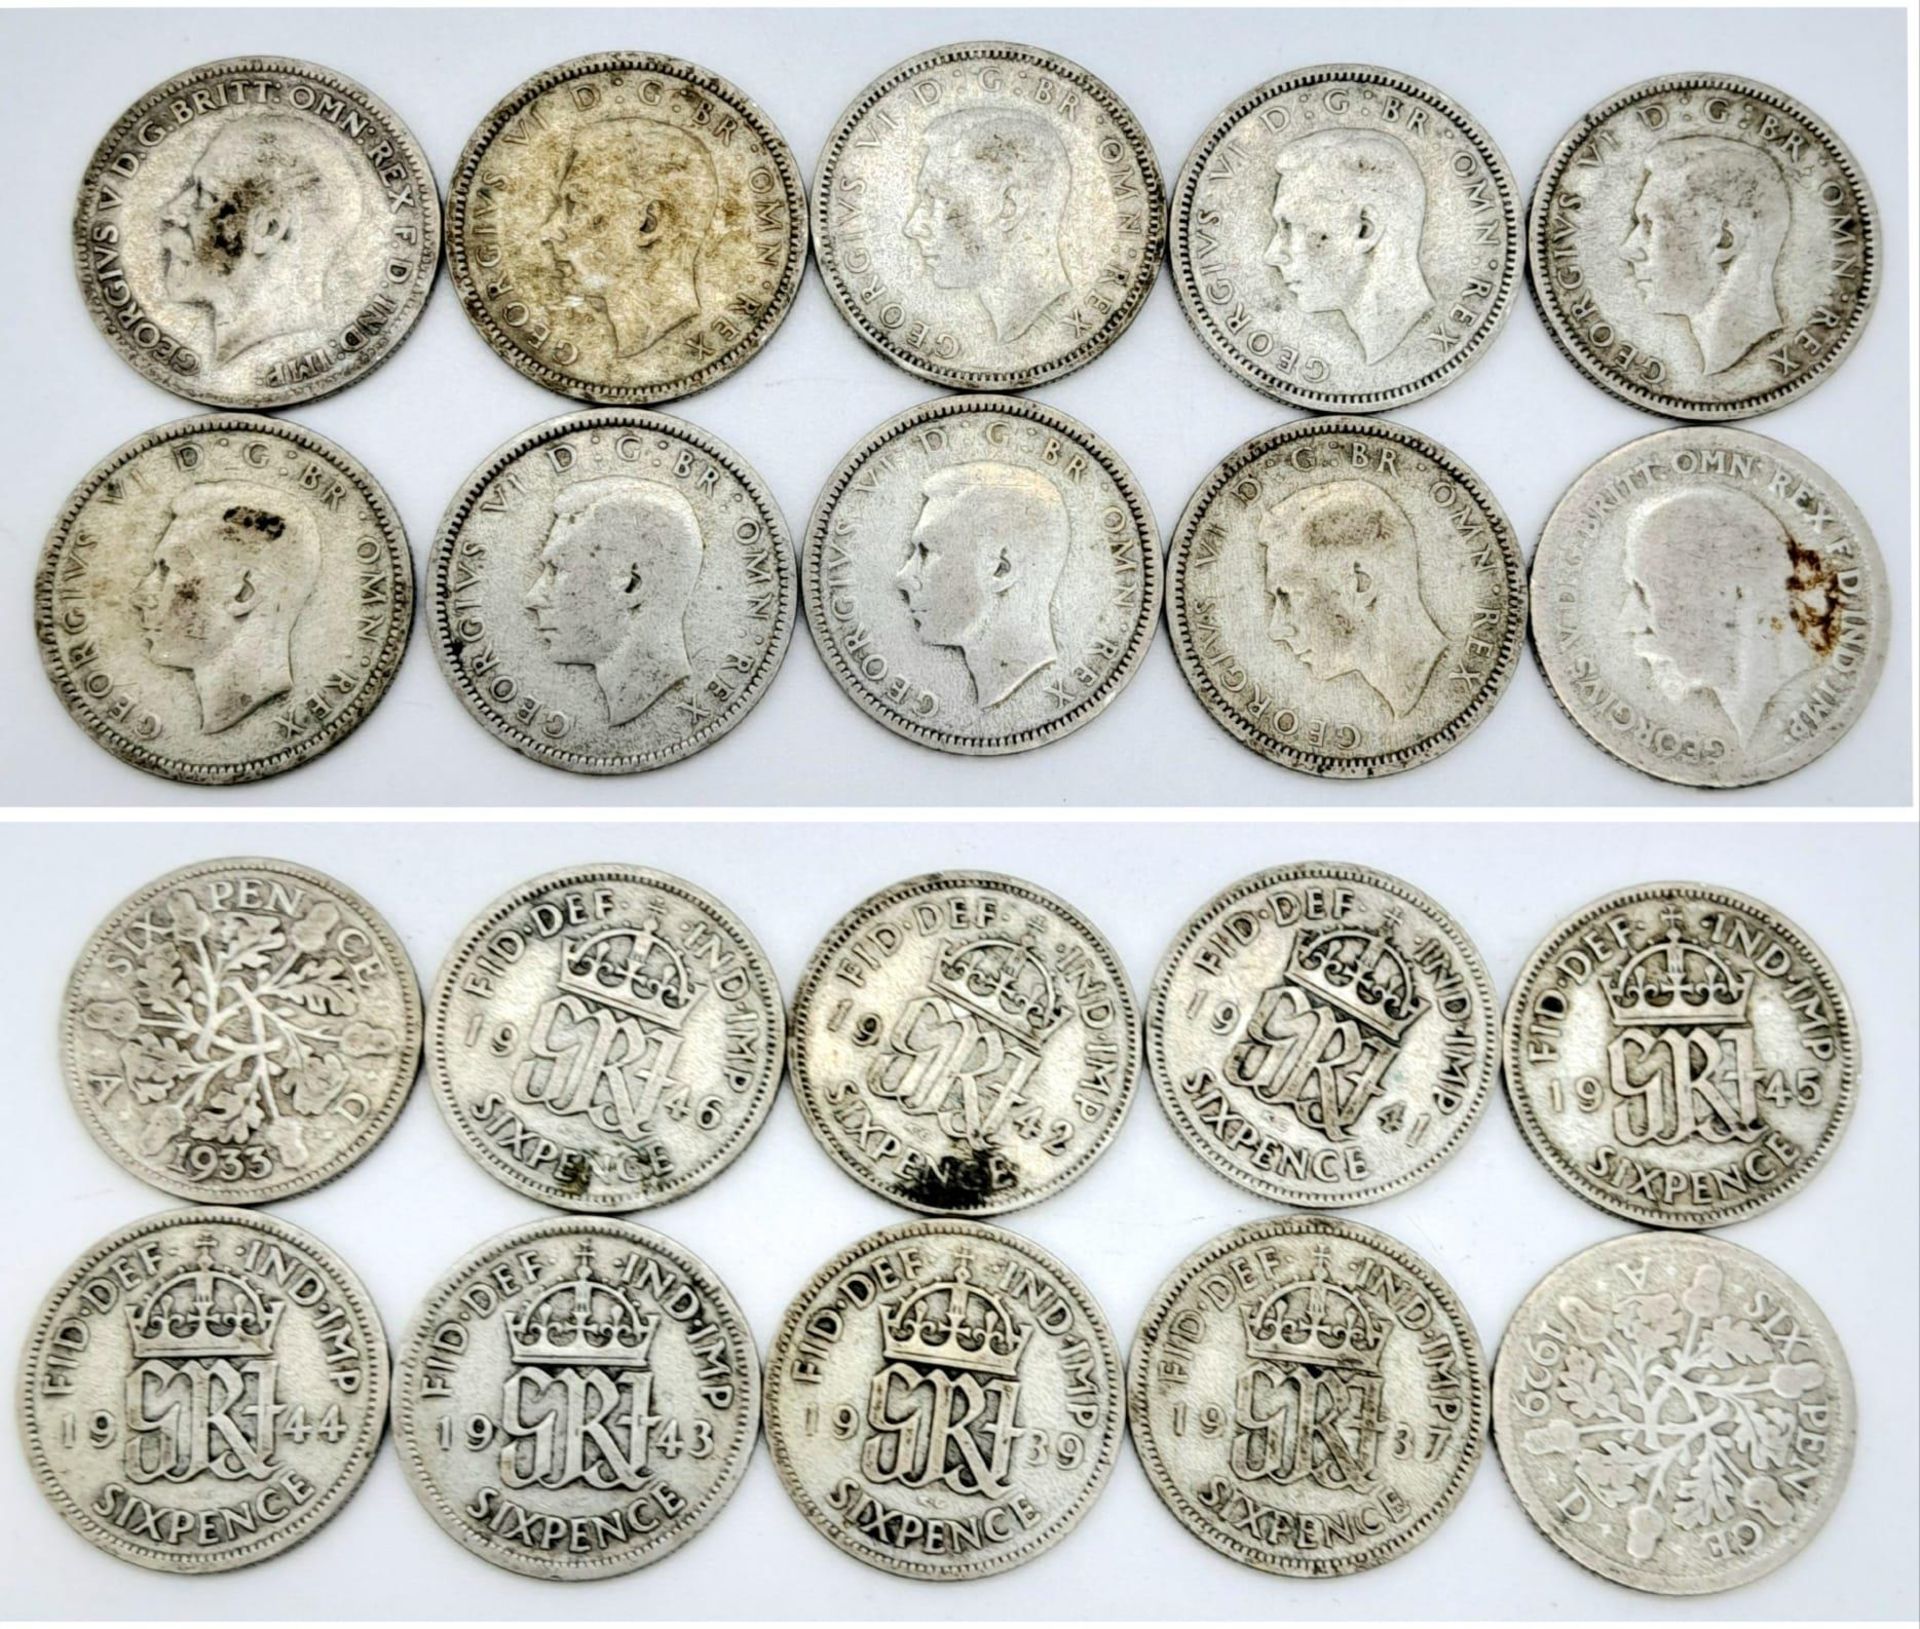 SELECTION OF 10 SIX PENCE PIECE COINS ALL DATED PRE-1947, SO HAVING MINIMUM OF 50% SILVER CONTANT